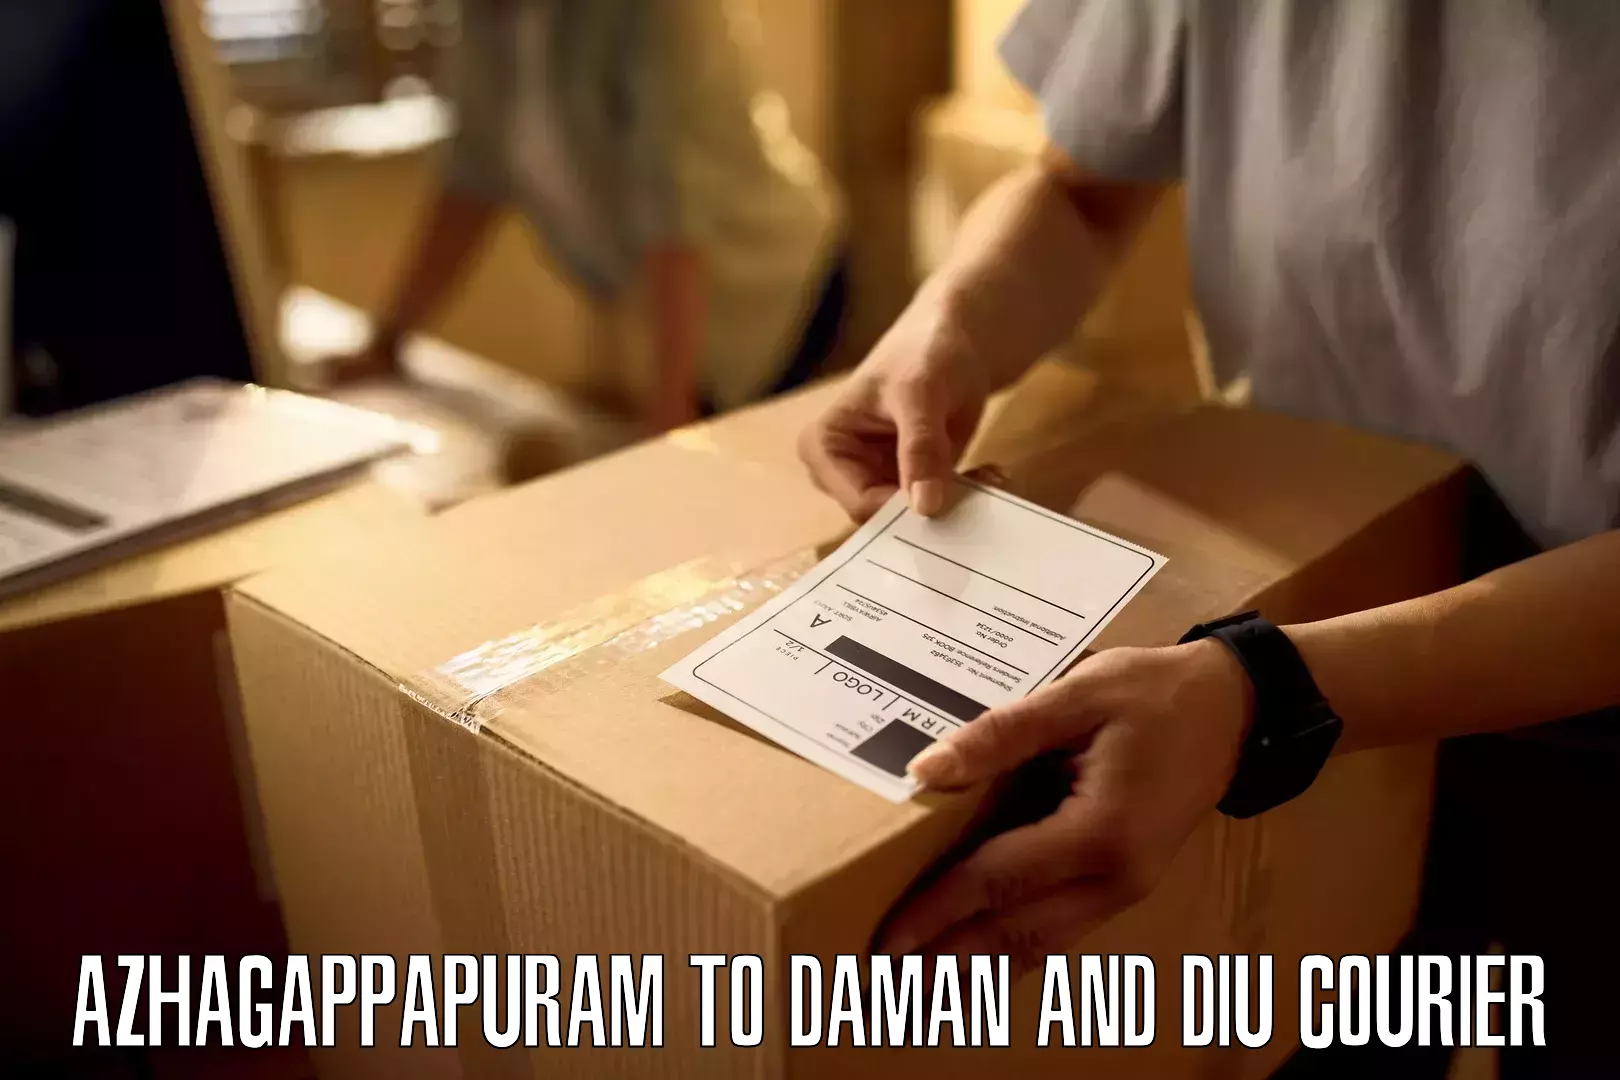 Cash on delivery service Azhagappapuram to Daman and Diu